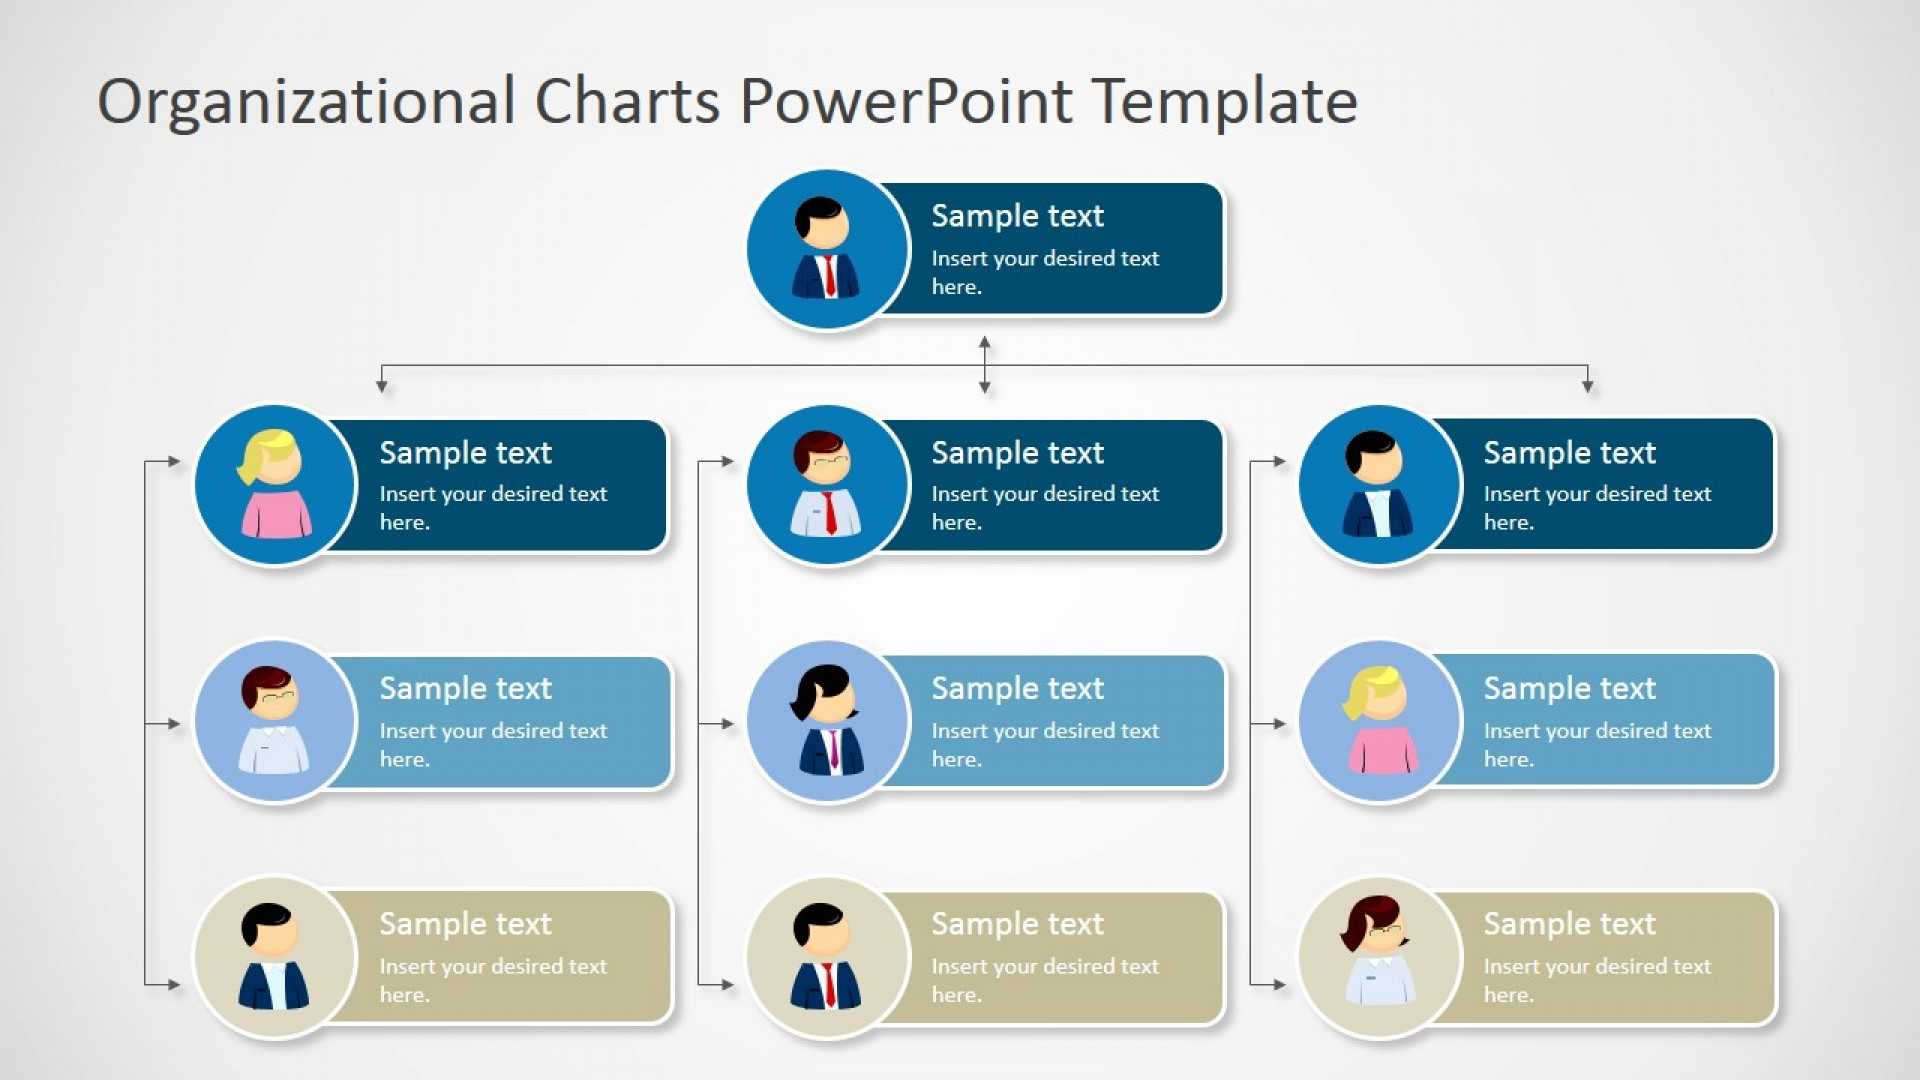 006 Microsoft Org Chart Template Powerpoint Organizational In Microsoft Powerpoint Org Chart Template